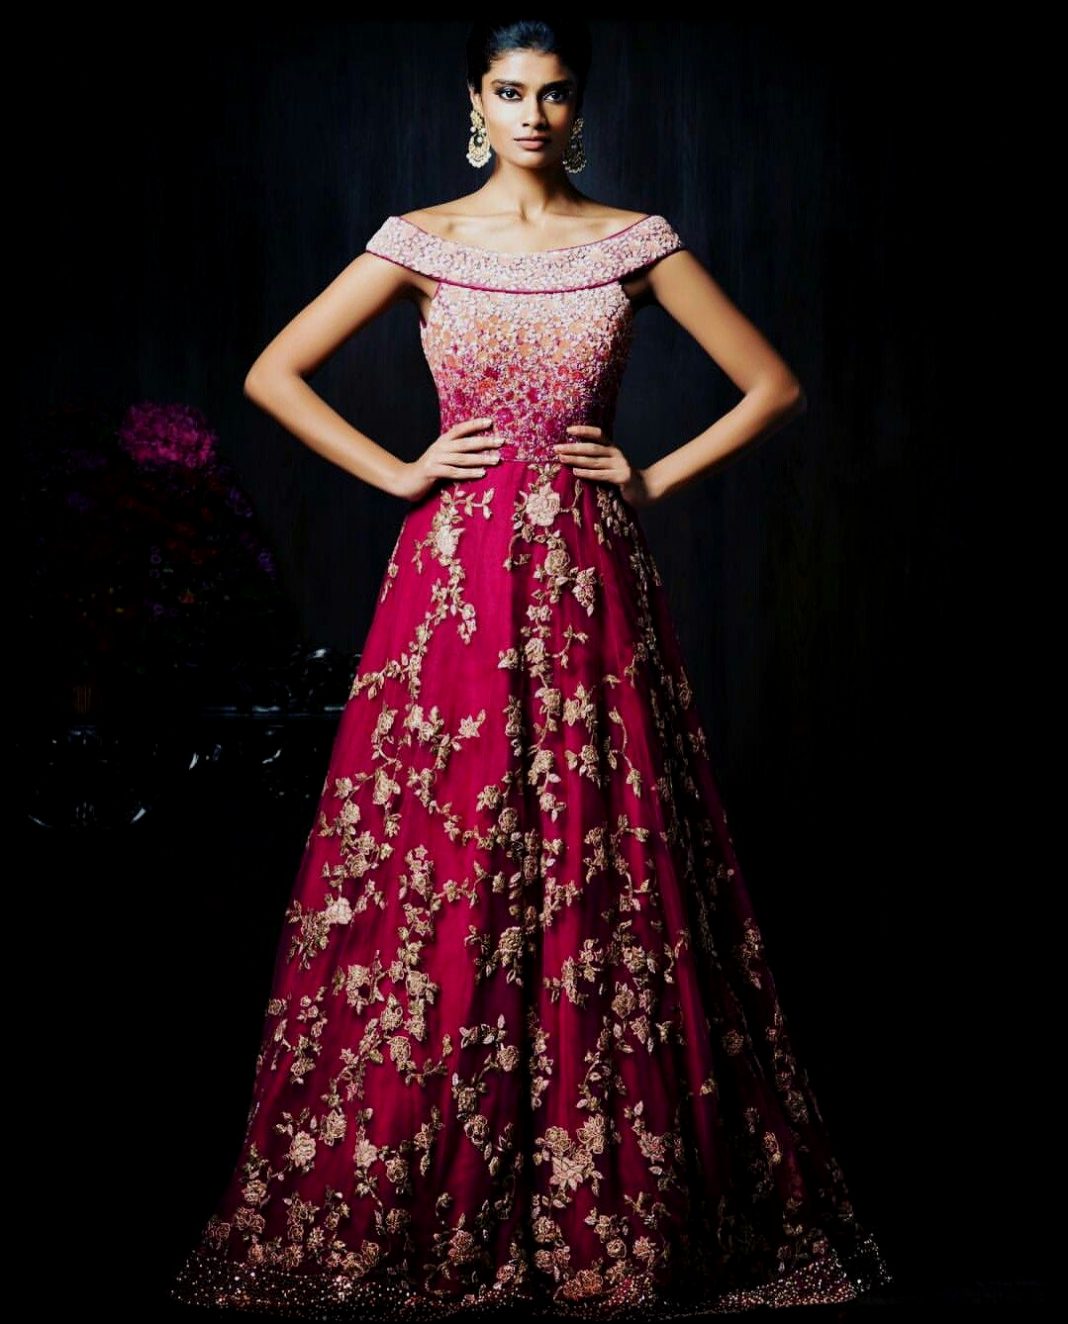 Pretty Pink Indian Wedding Gown 1068x1324 